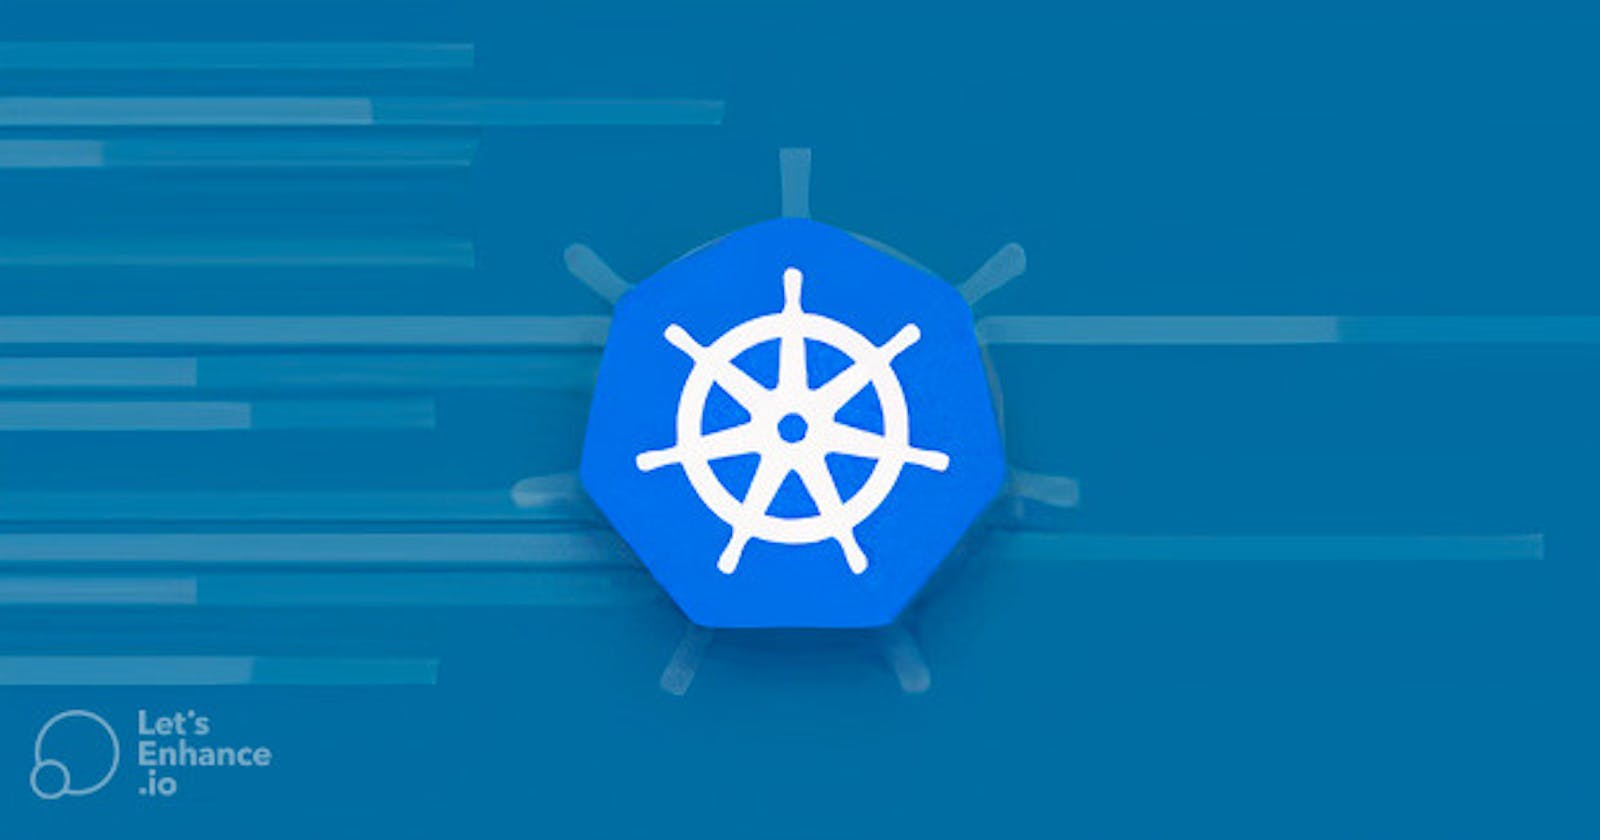 Installation and Setup of the Kubernetes Cluster